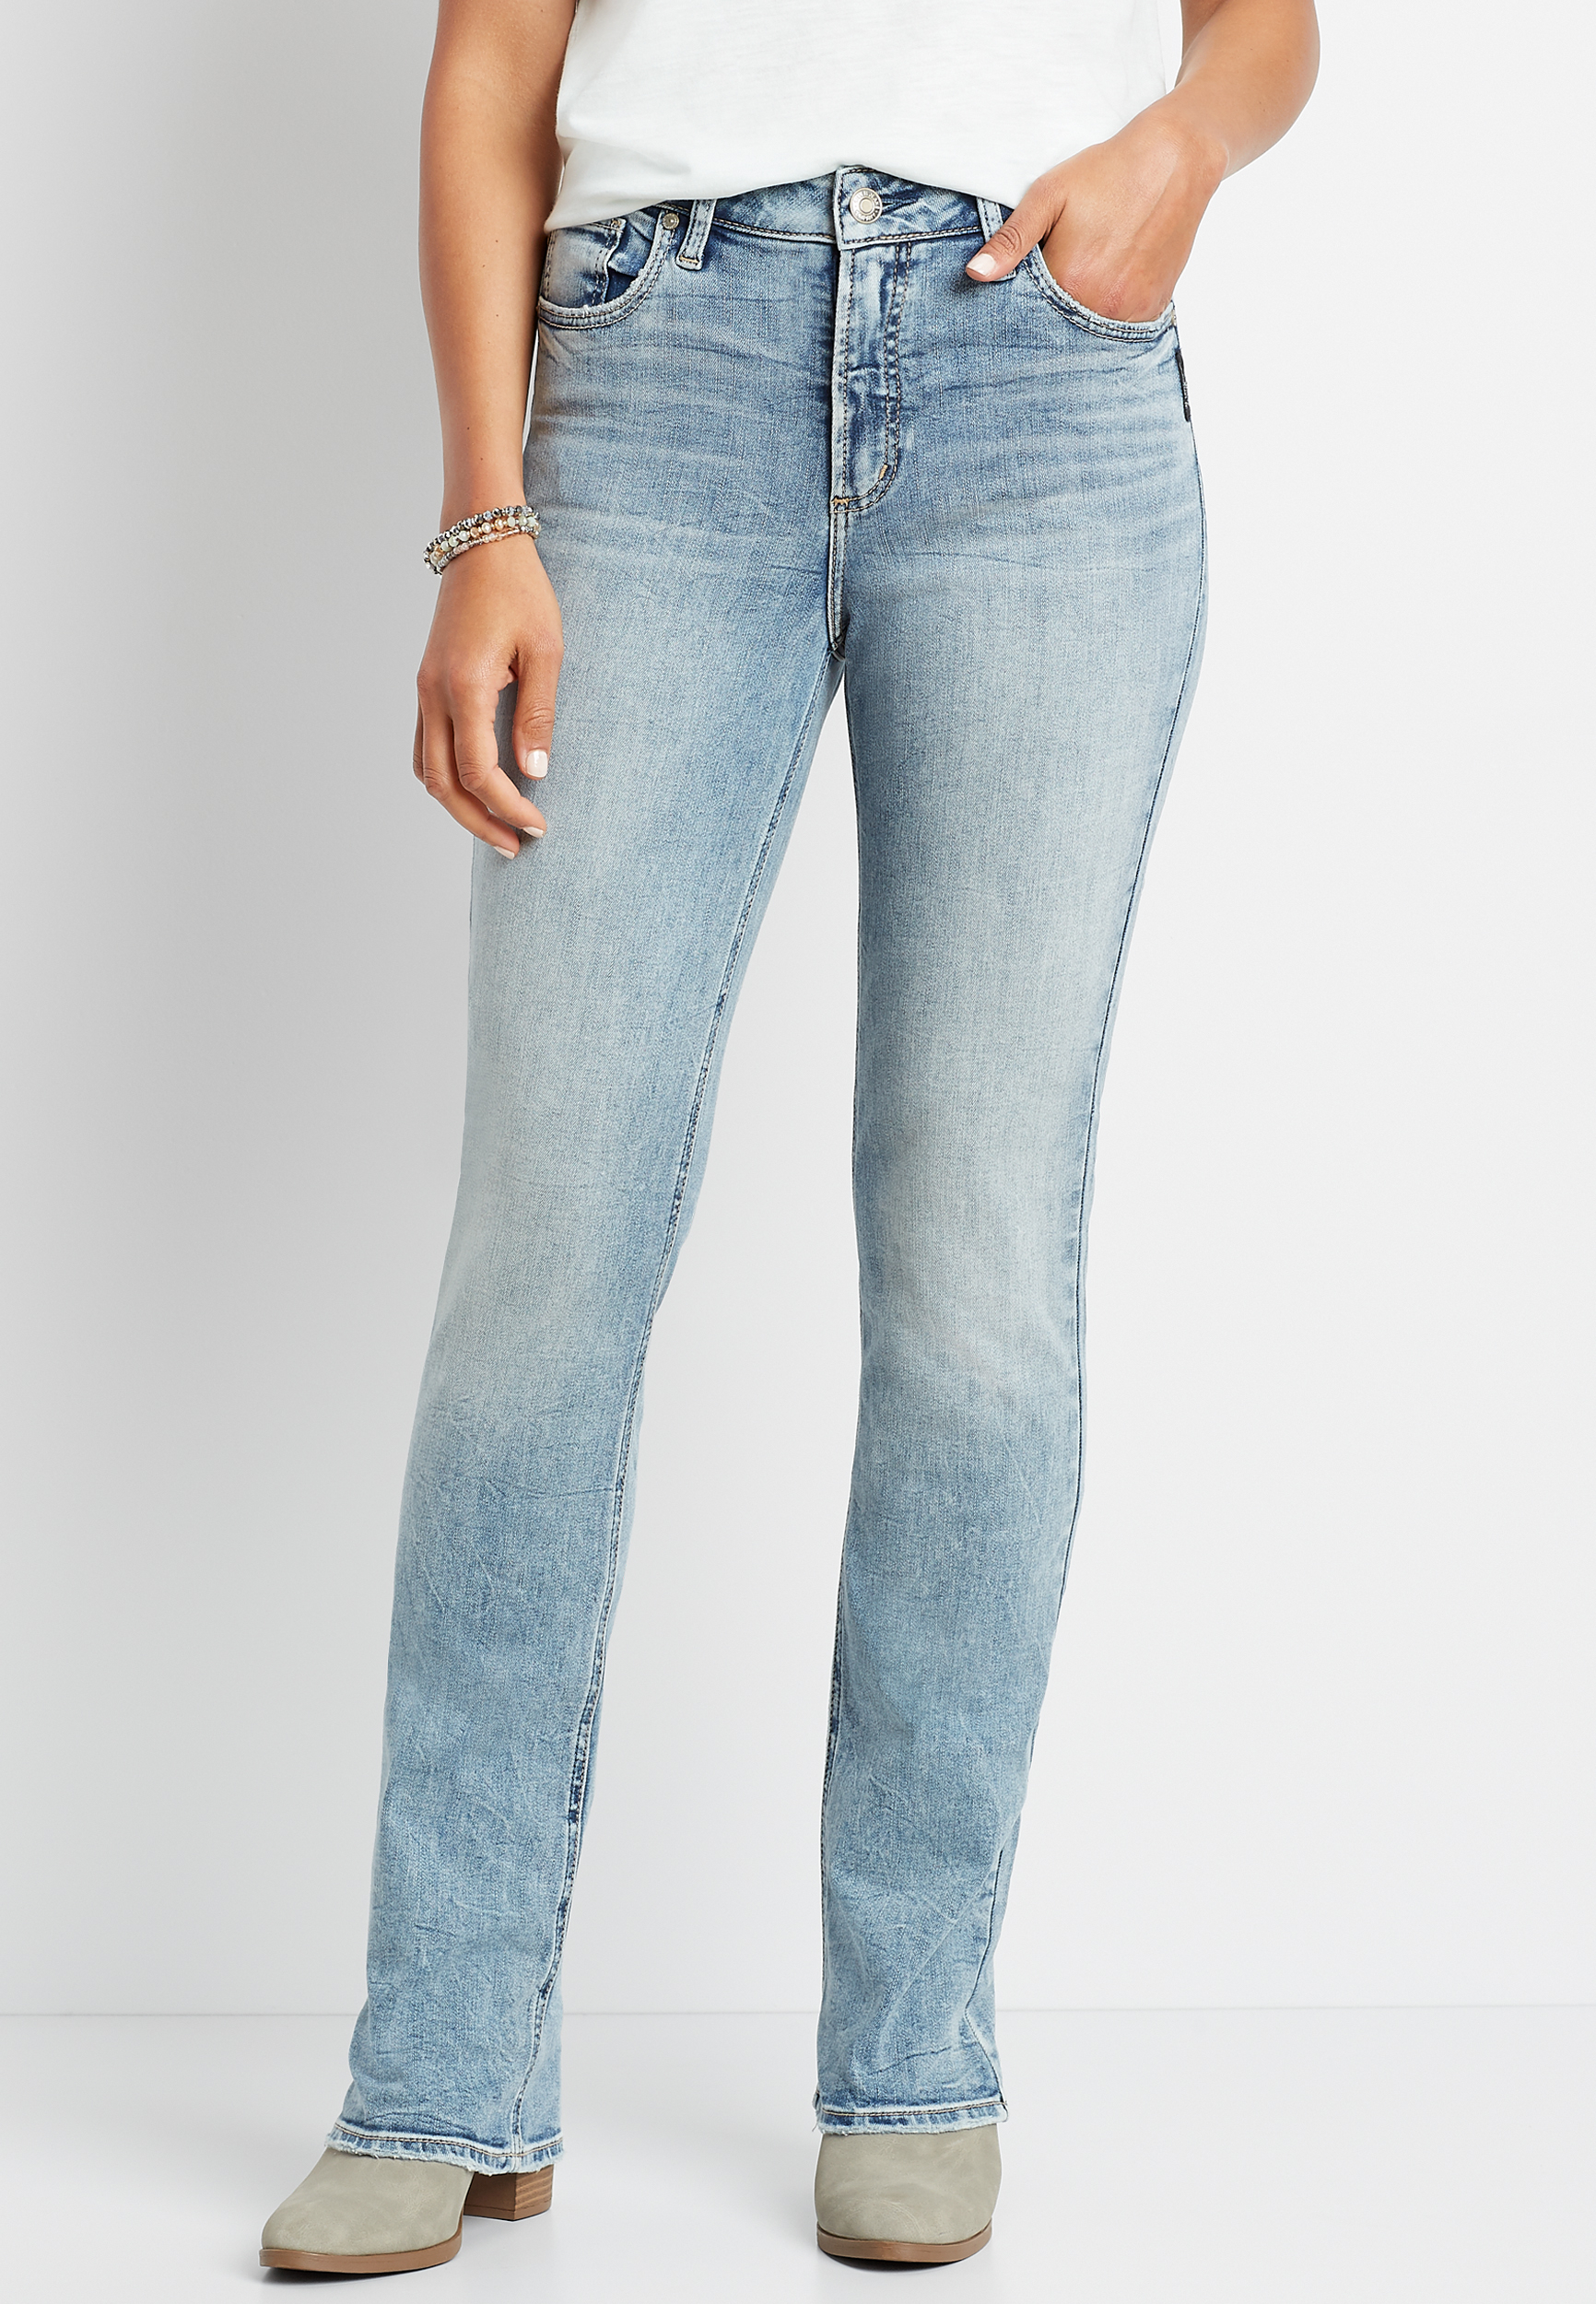 silver avery slim boot jeans